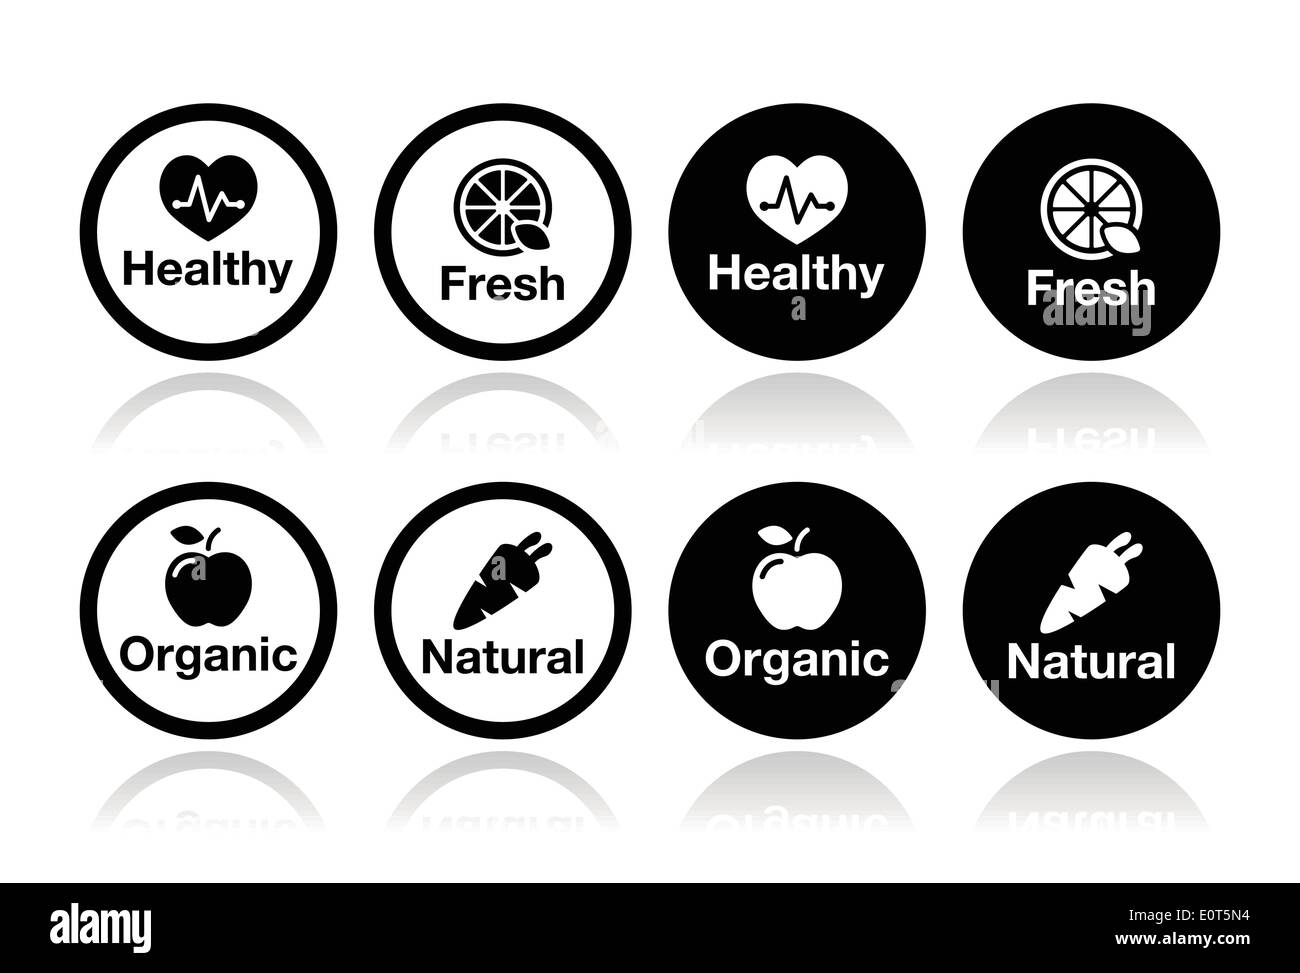 Organic food, fresh and natural products icons set Stock Vector